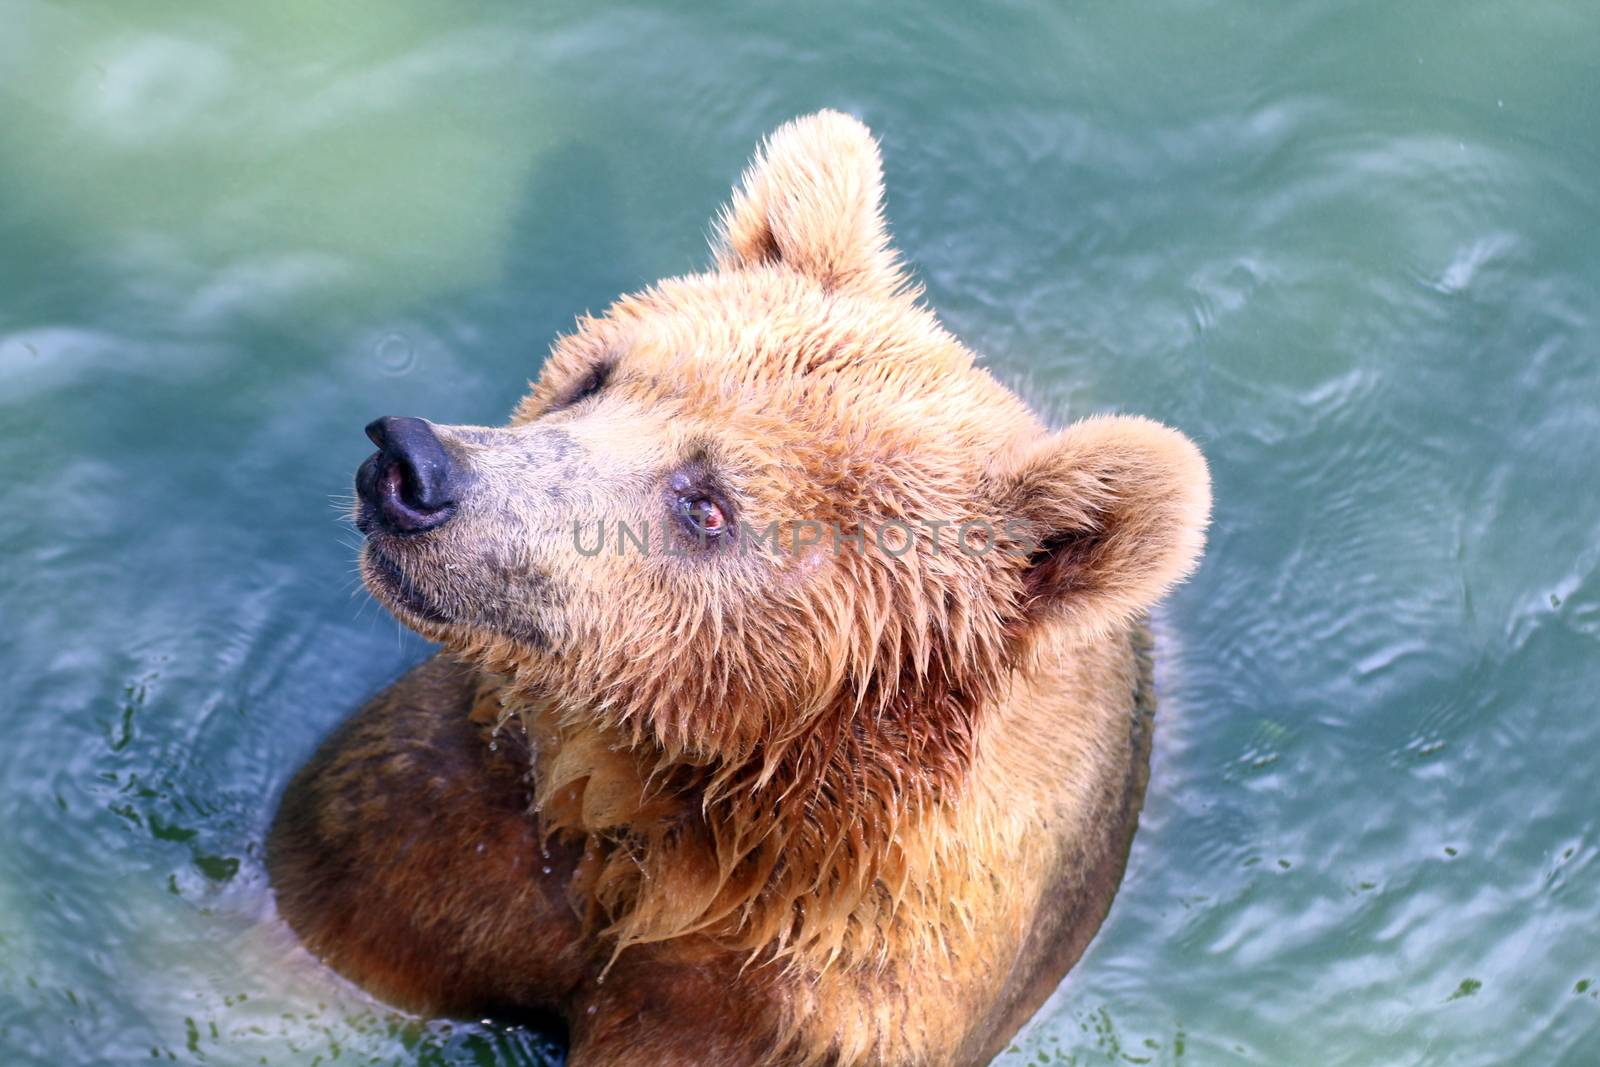 Bear, Grizzly bear in water by cgdeaw